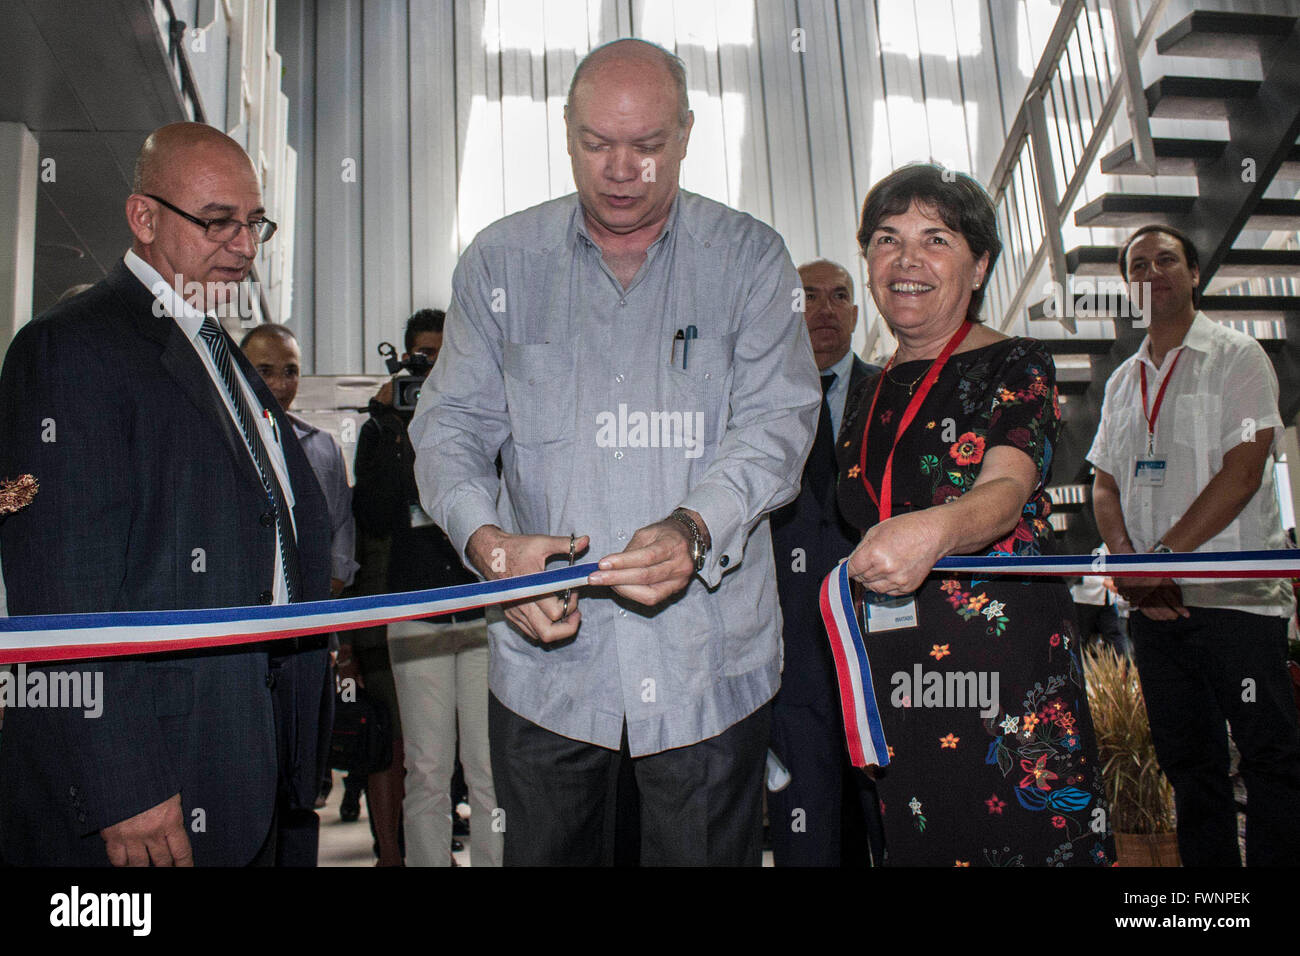 Havana, Cuba. 5th Apr, 2016. Cuba's Construction Minister Rene Mesa (L), Foreign Trade Minister Rodrigo Malmierca (C) and Chile's Housing and Urbanism Minister Maria Paulina cut the ribbon during the opening ceremony of 6th International Construction Fair at Pabexpo exhibition complex in Havana, Cuba, on April 5, 2016. According to local press, around 199 exhibitors from 29 countries and regions participated in this 5-day fair, which kicked off on April 5. © Joaquin Hernandez/Xinhua/Alamy Live News Stock Photo